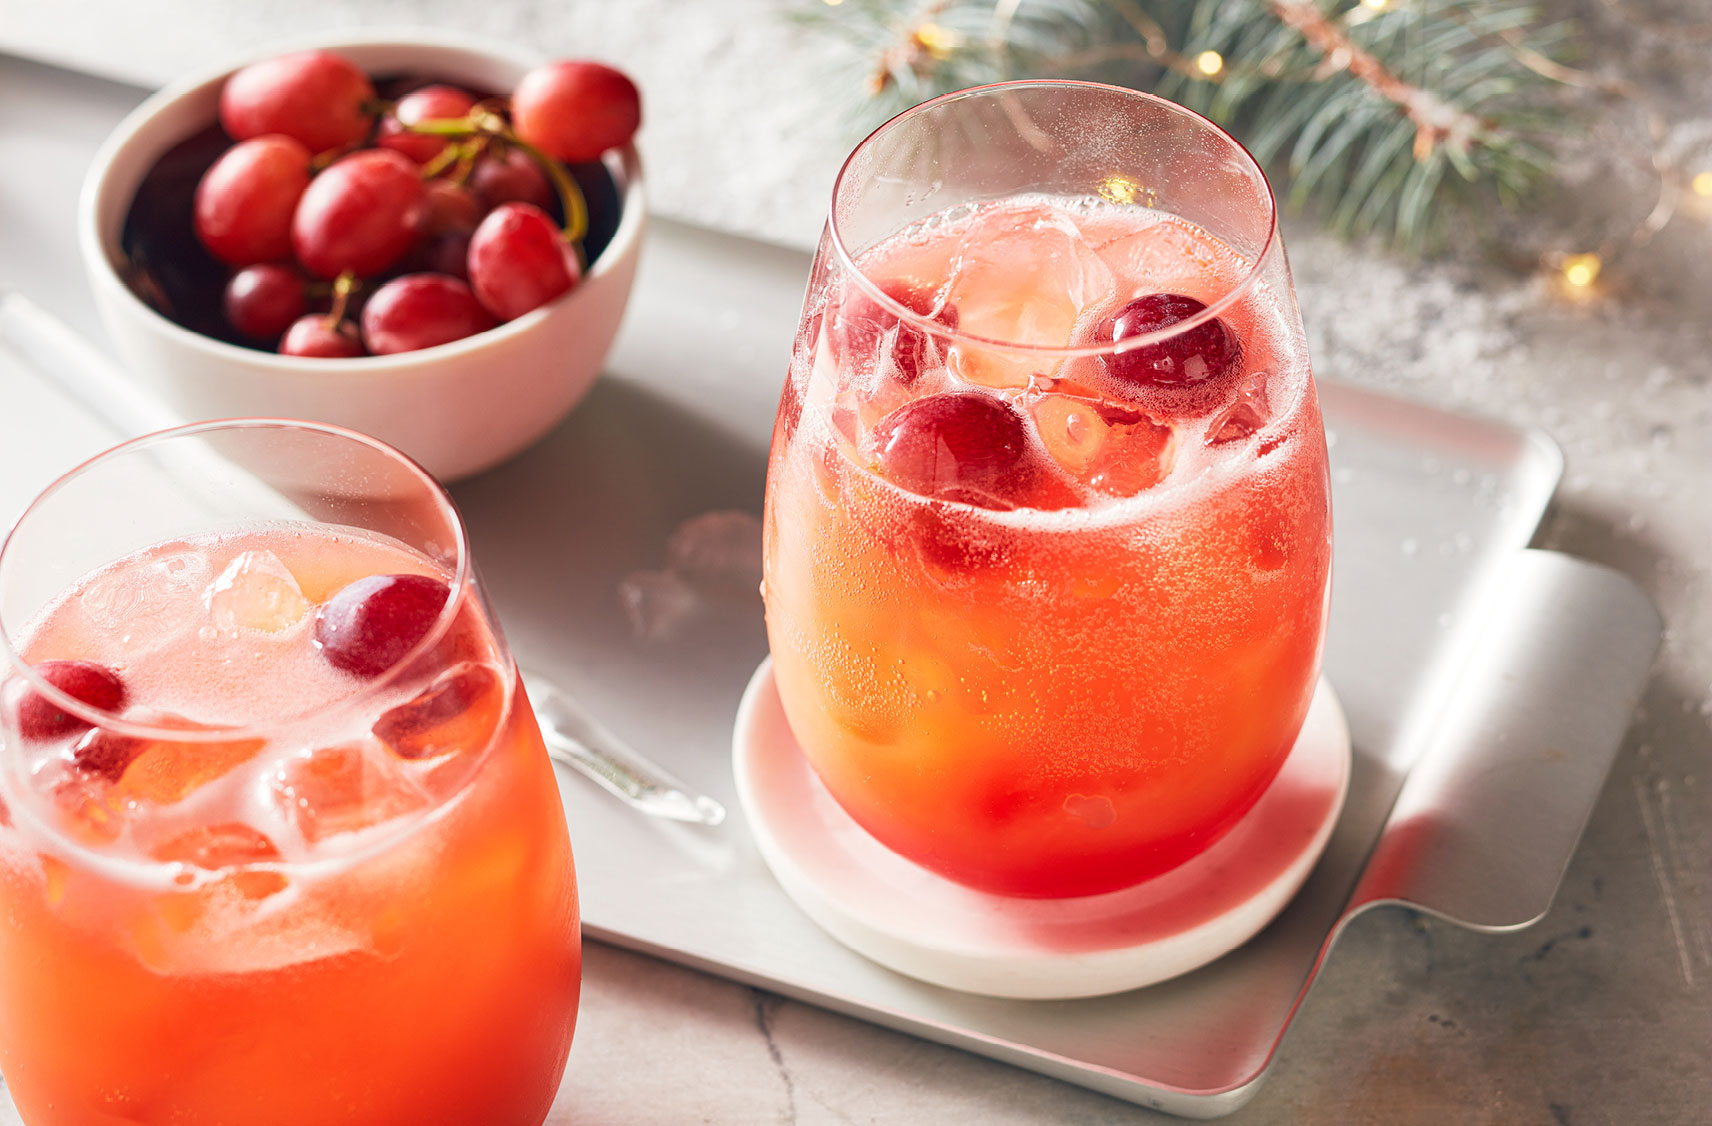 Two sparkling juices with ice cubes and red grapes in a cup on a silver serving platter.